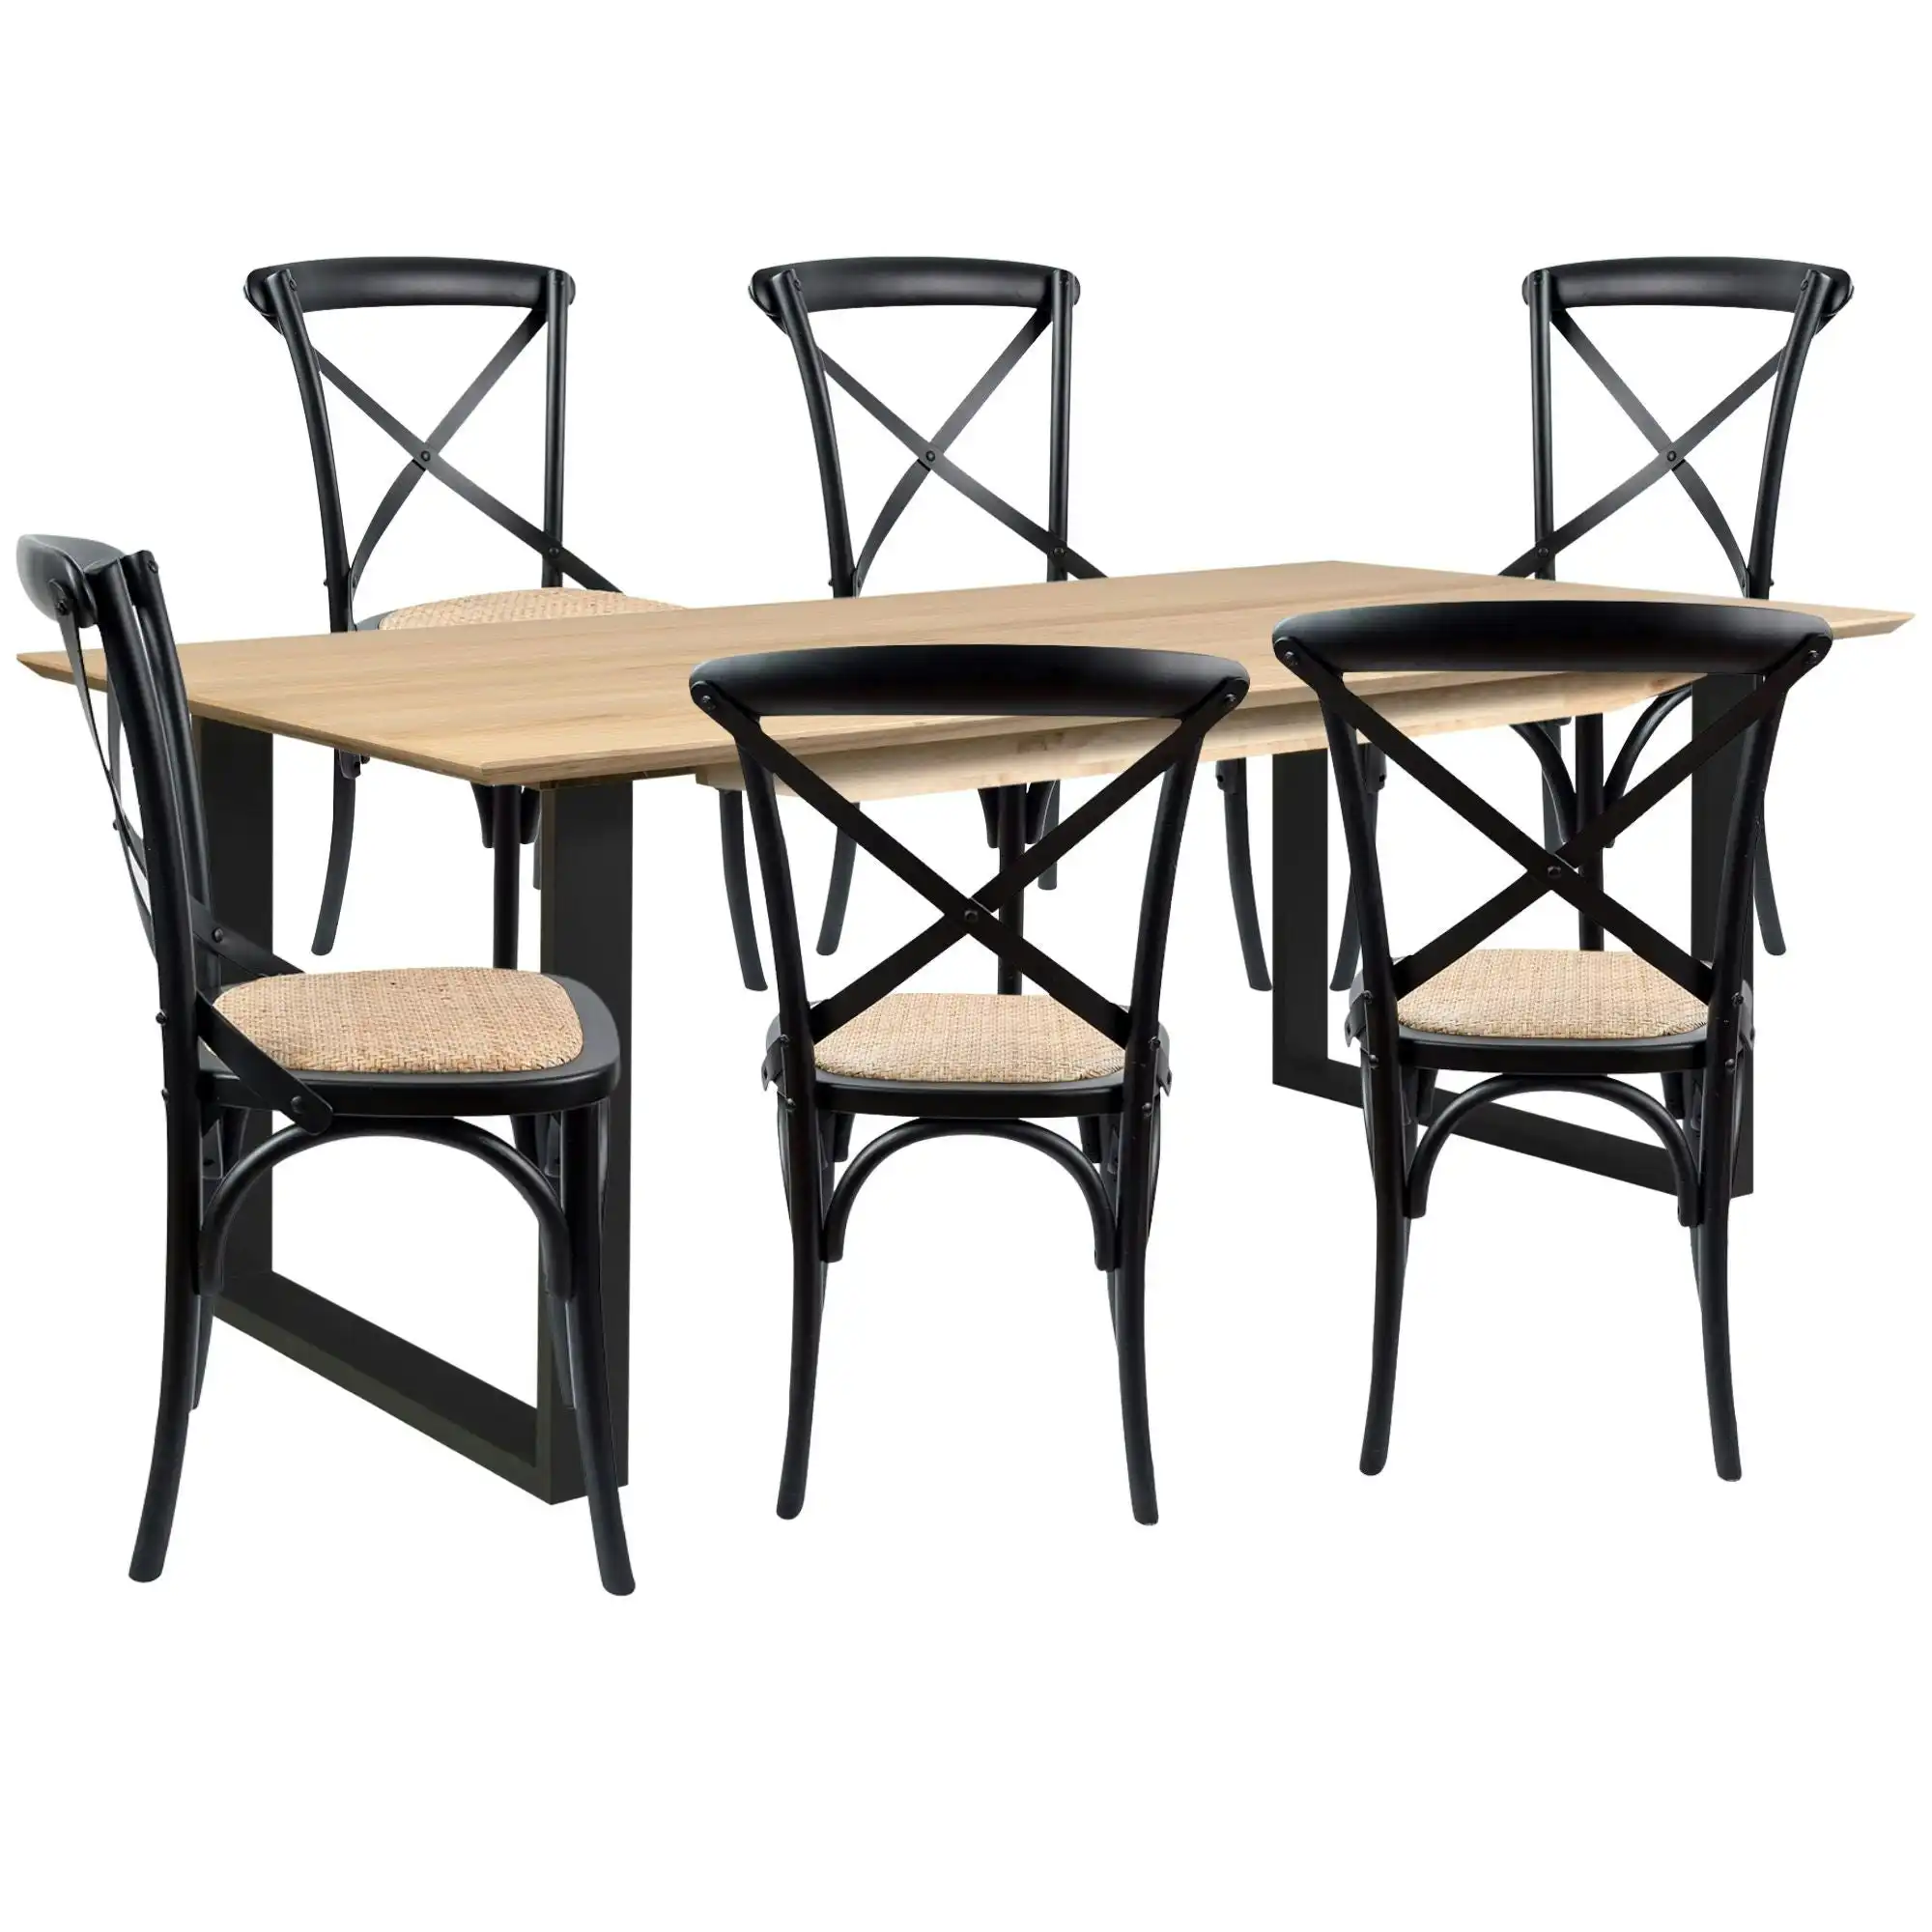 Aconite 7pc 180cm Dining Table X-back Chair Set